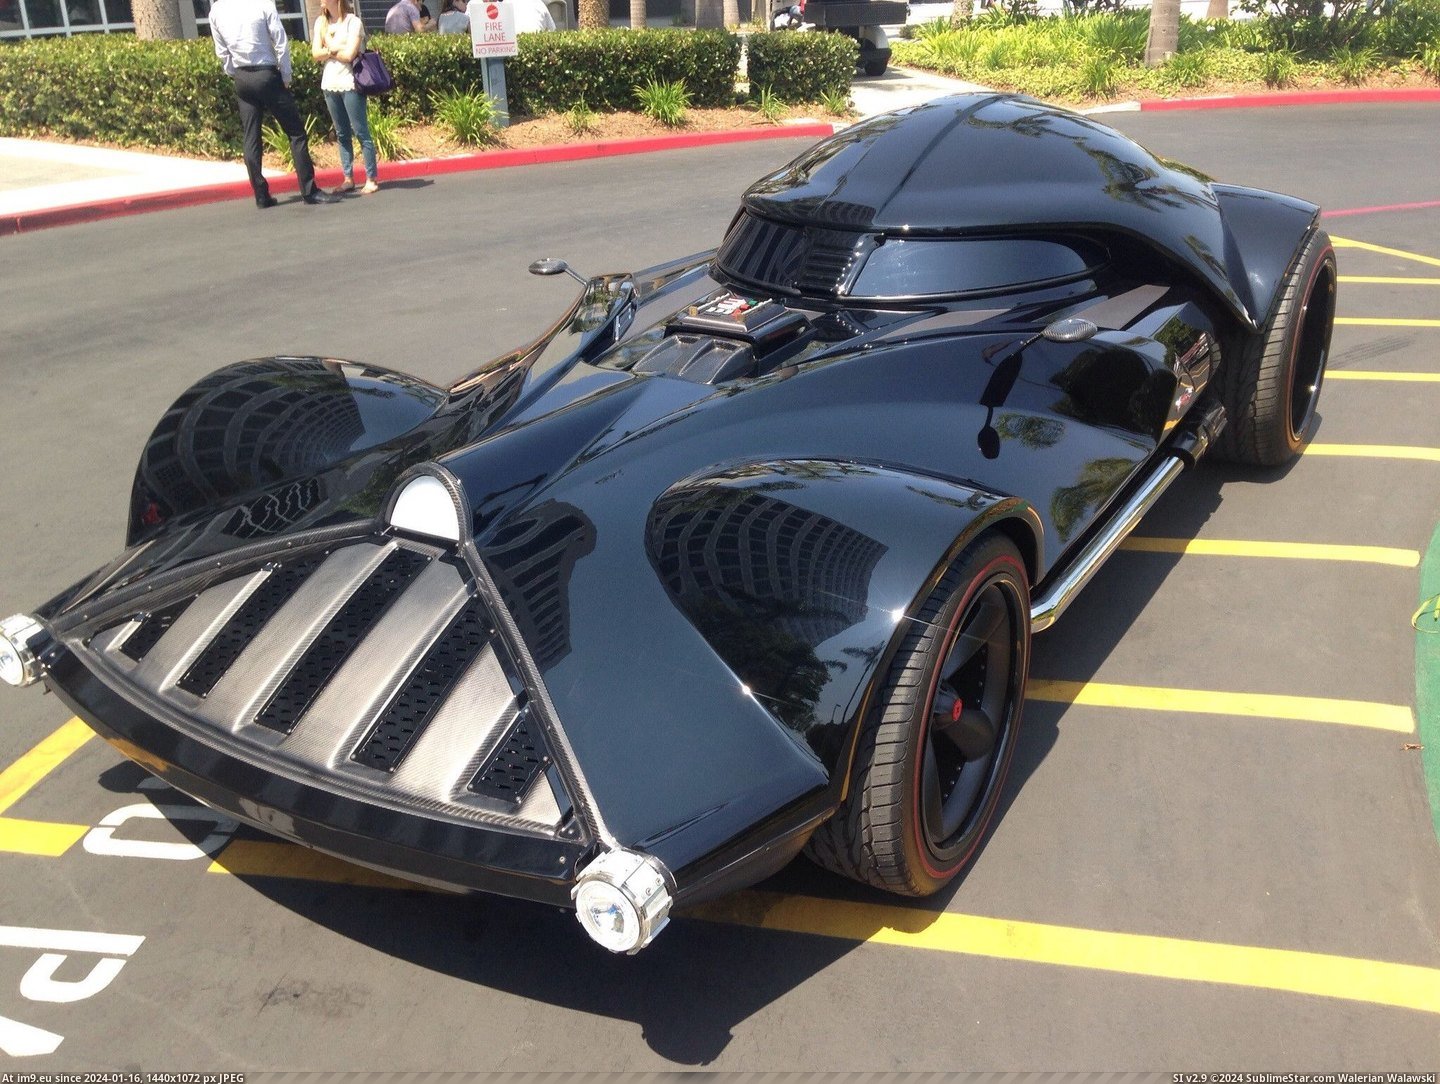 #Company #Drove #Vader #Lord #Picnic [Pics] Lord Vader drove in for the company picnic Pic. (Image of album My r/PICS favs))